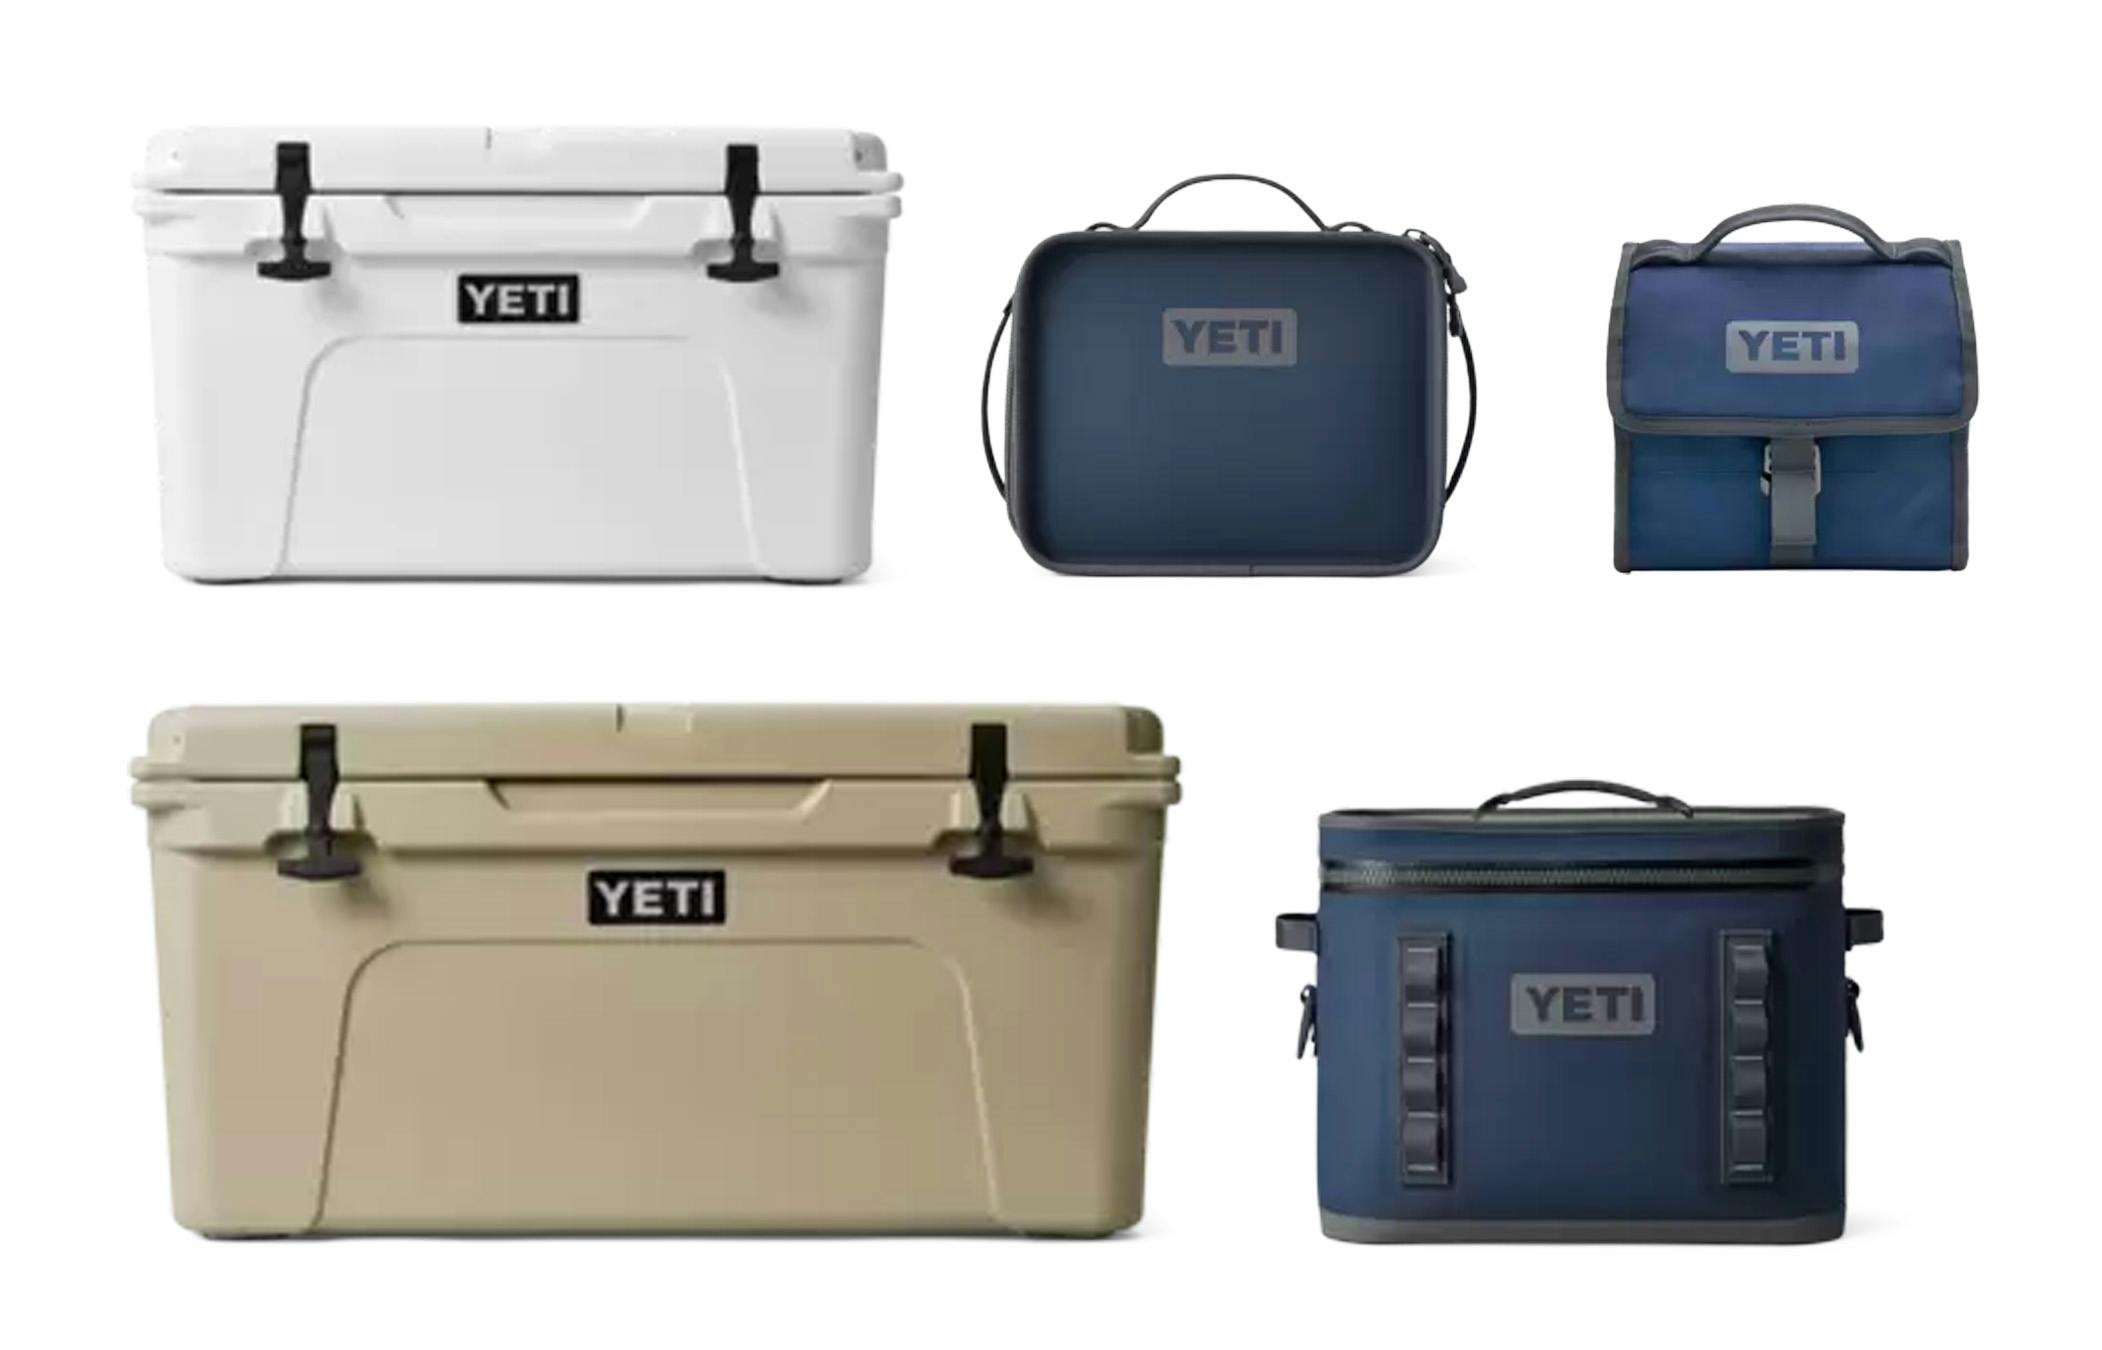 Group of products Yeti has selected to replace the recalled coolers and bags.